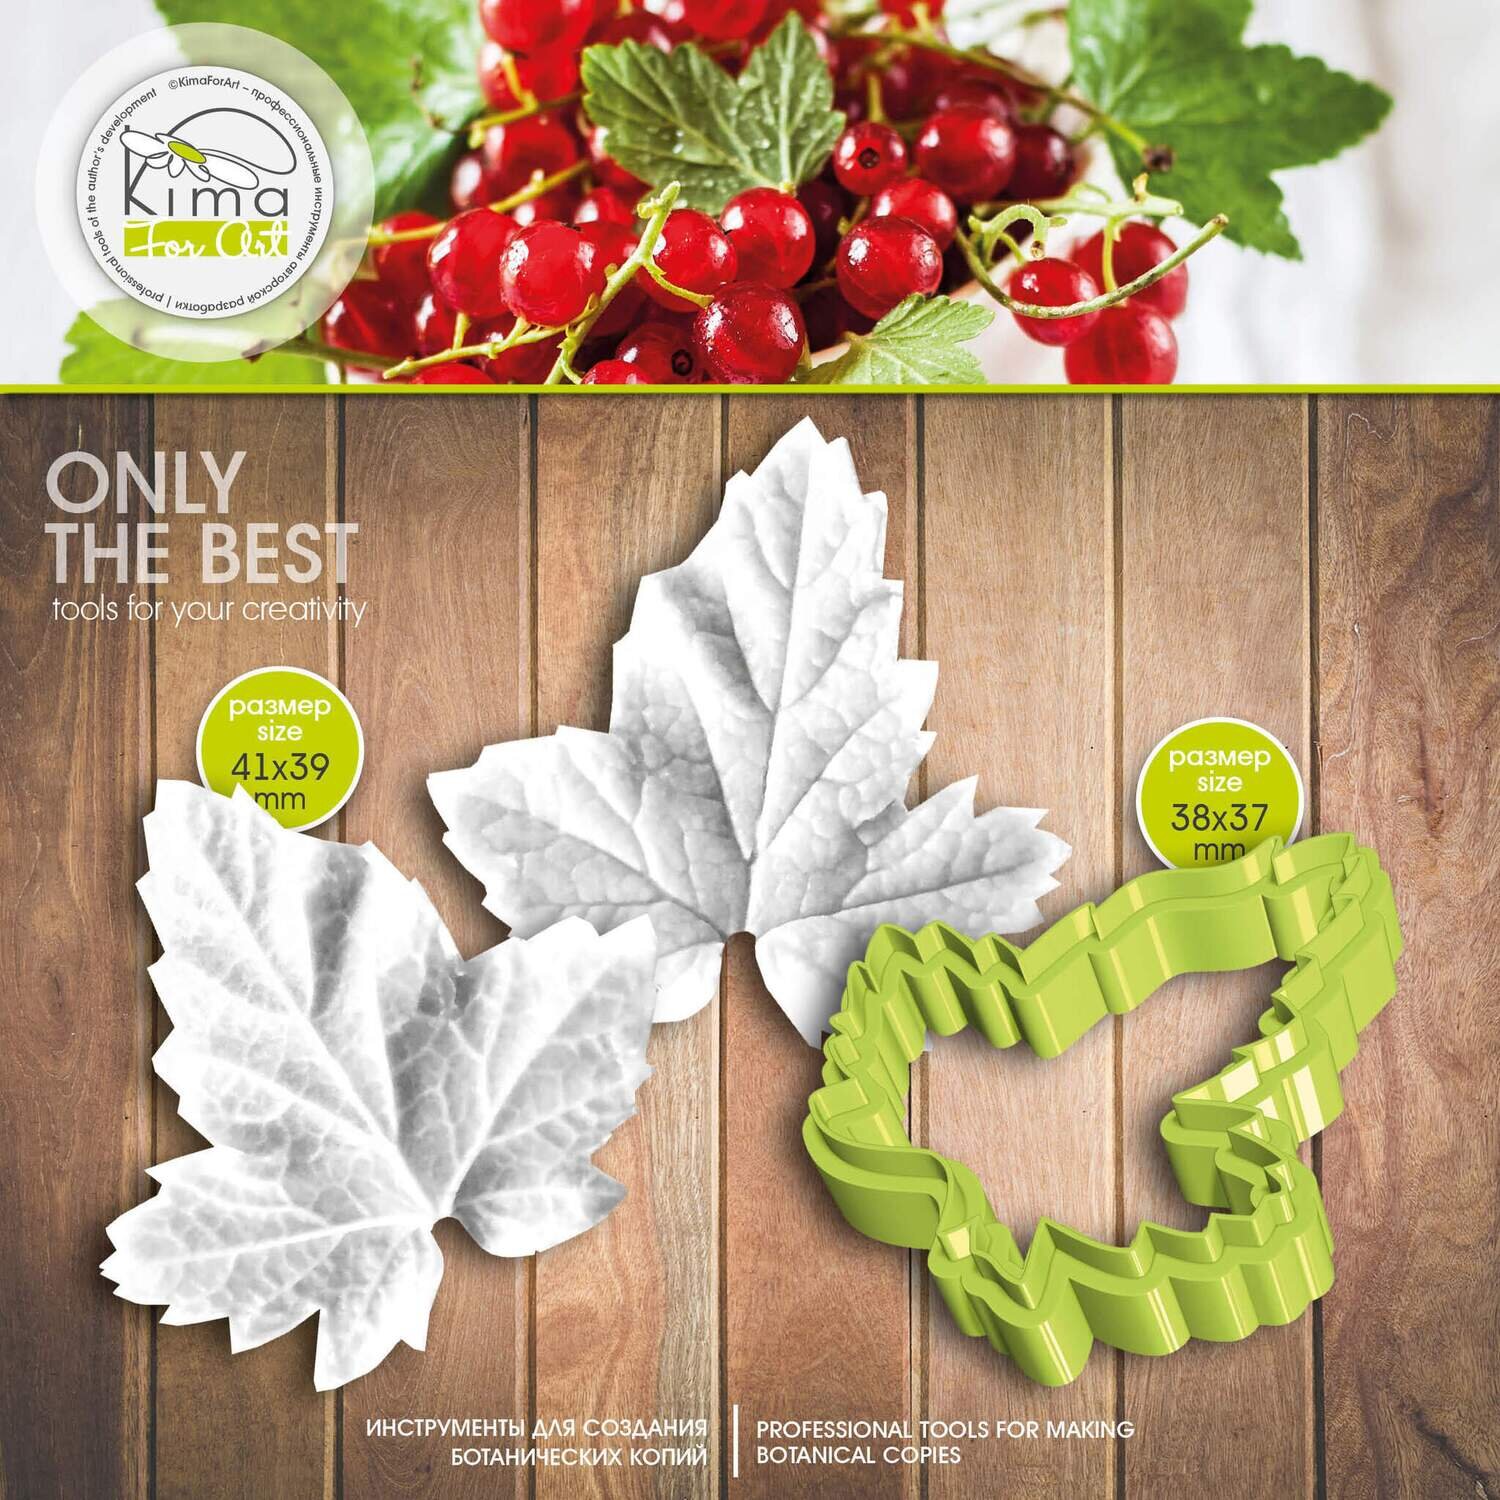 Currant leaf S